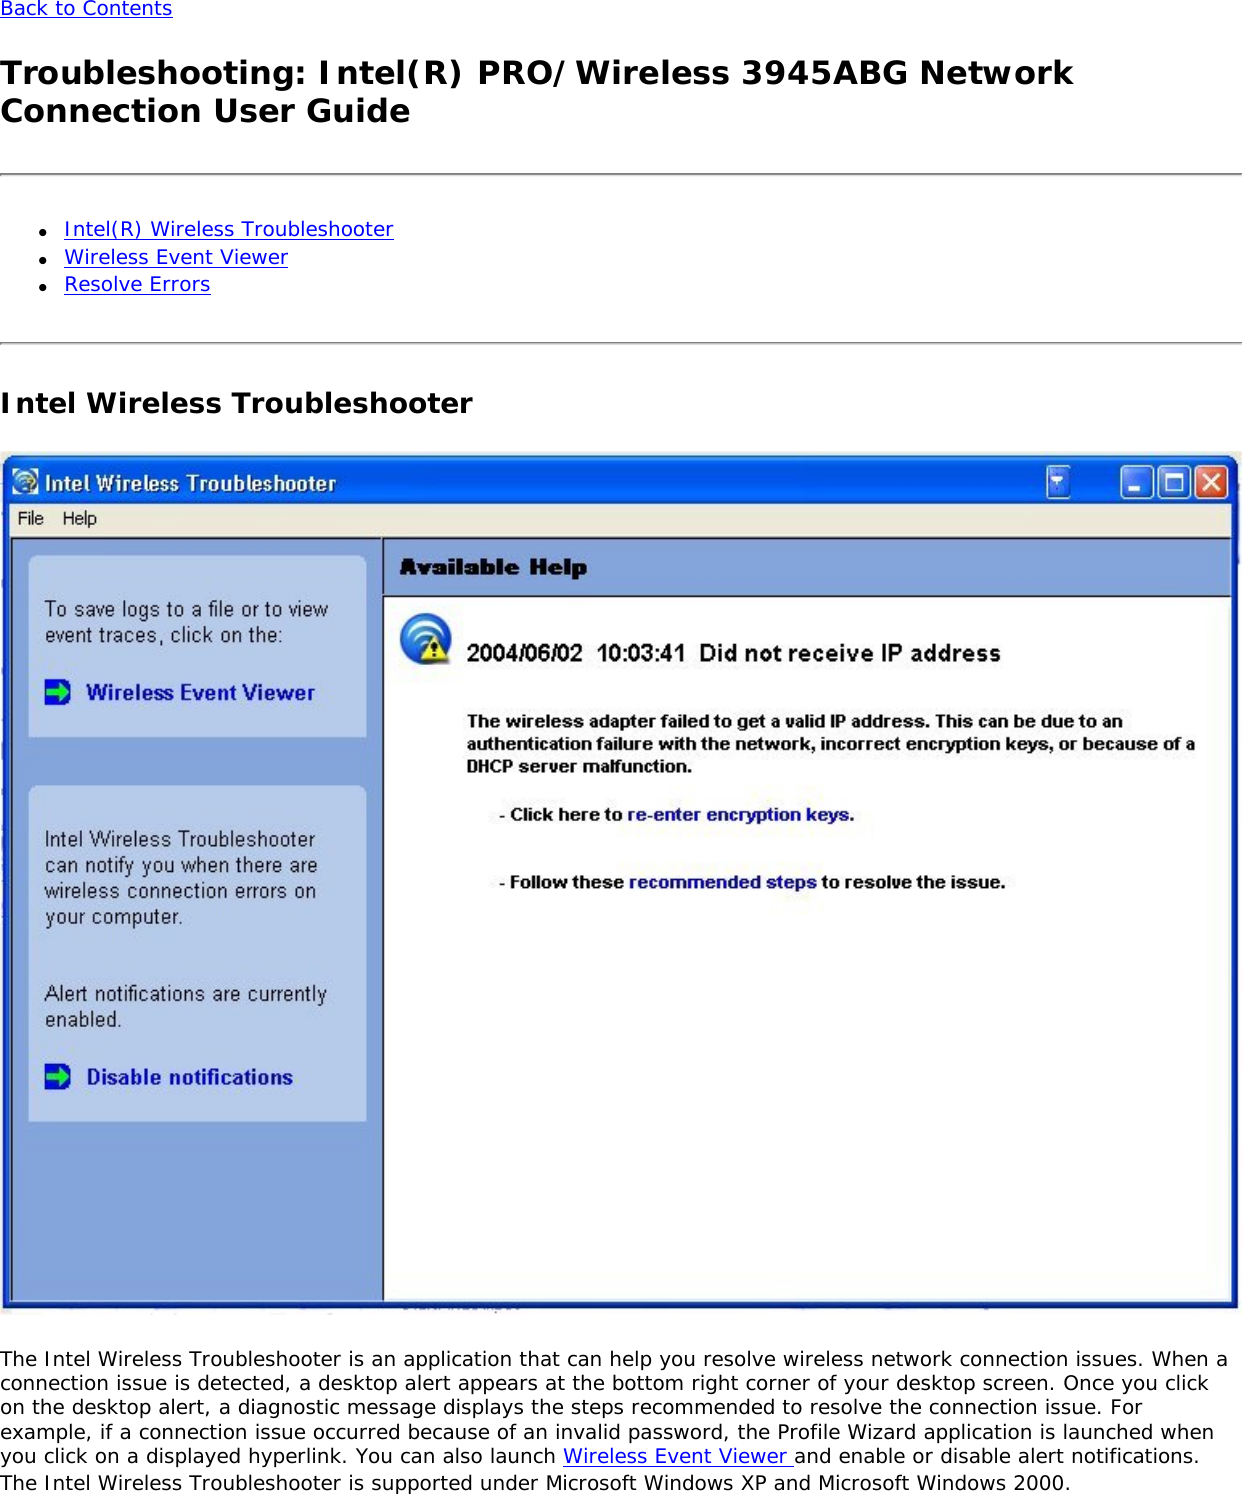 Back to Contents Troubleshooting: Intel(R) PRO/Wireless 3945ABG Network Connection User Guide●     Intel(R) Wireless Troubleshooter●     Wireless Event Viewer●     Resolve ErrorsIntel Wireless Troubleshooter  The Intel Wireless Troubleshooter is an application that can help you resolve wireless network connection issues. When a connection issue is detected, a desktop alert appears at the bottom right corner of your desktop screen. Once you click on the desktop alert, a diagnostic message displays the steps recommended to resolve the connection issue. For example, if a connection issue occurred because of an invalid password, the Profile Wizard application is launched when you click on a displayed hyperlink. You can also launch Wireless Event Viewer and enable or disable alert notifications. The Intel Wireless Troubleshooter is supported under Microsoft Windows XP and Microsoft Windows 2000. 